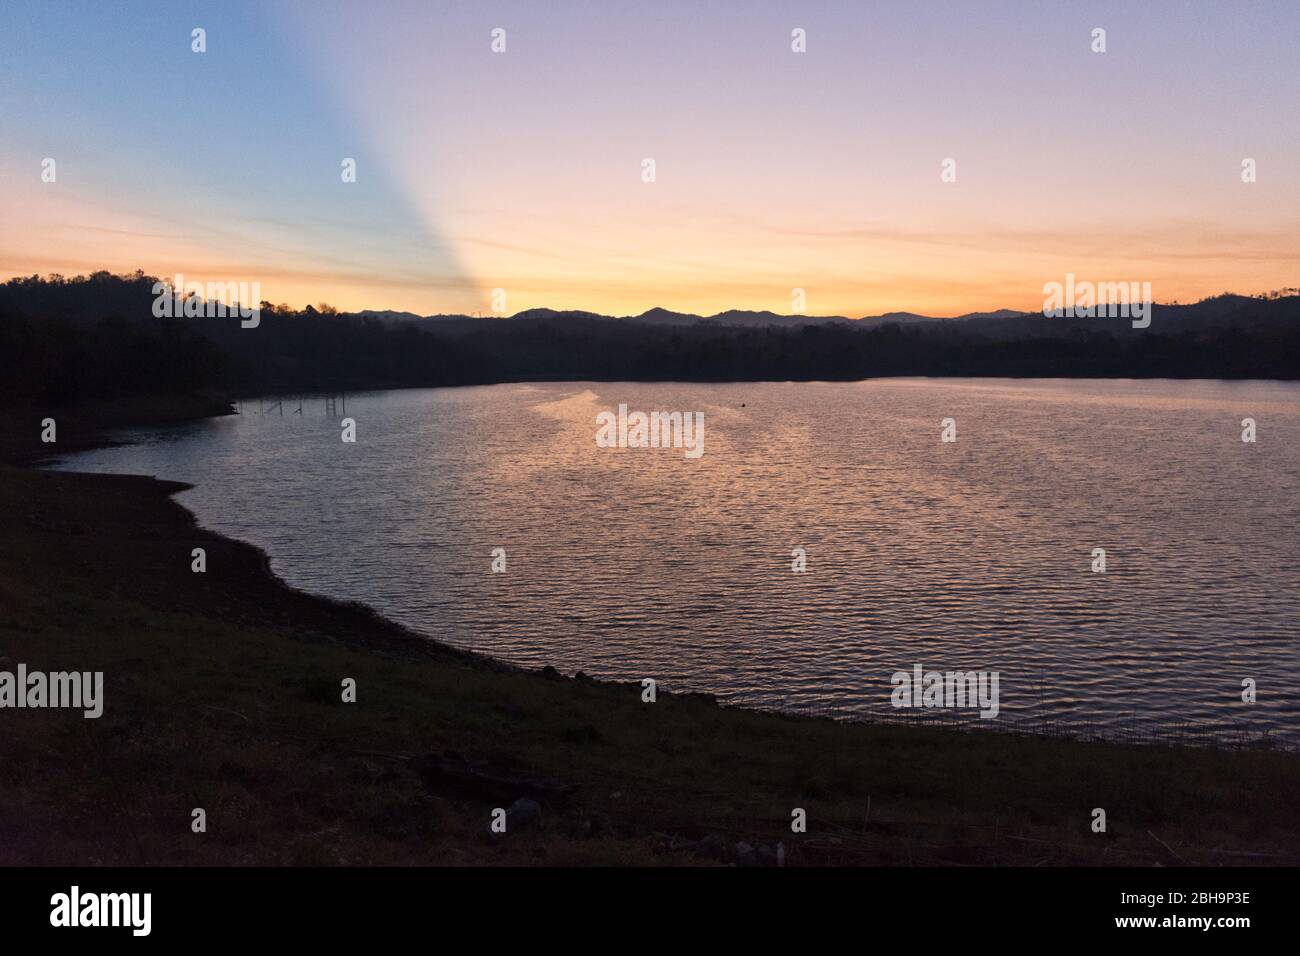 Sunrise over a Reservoir at Mae Sot, Thailand, Asia Stock Photo